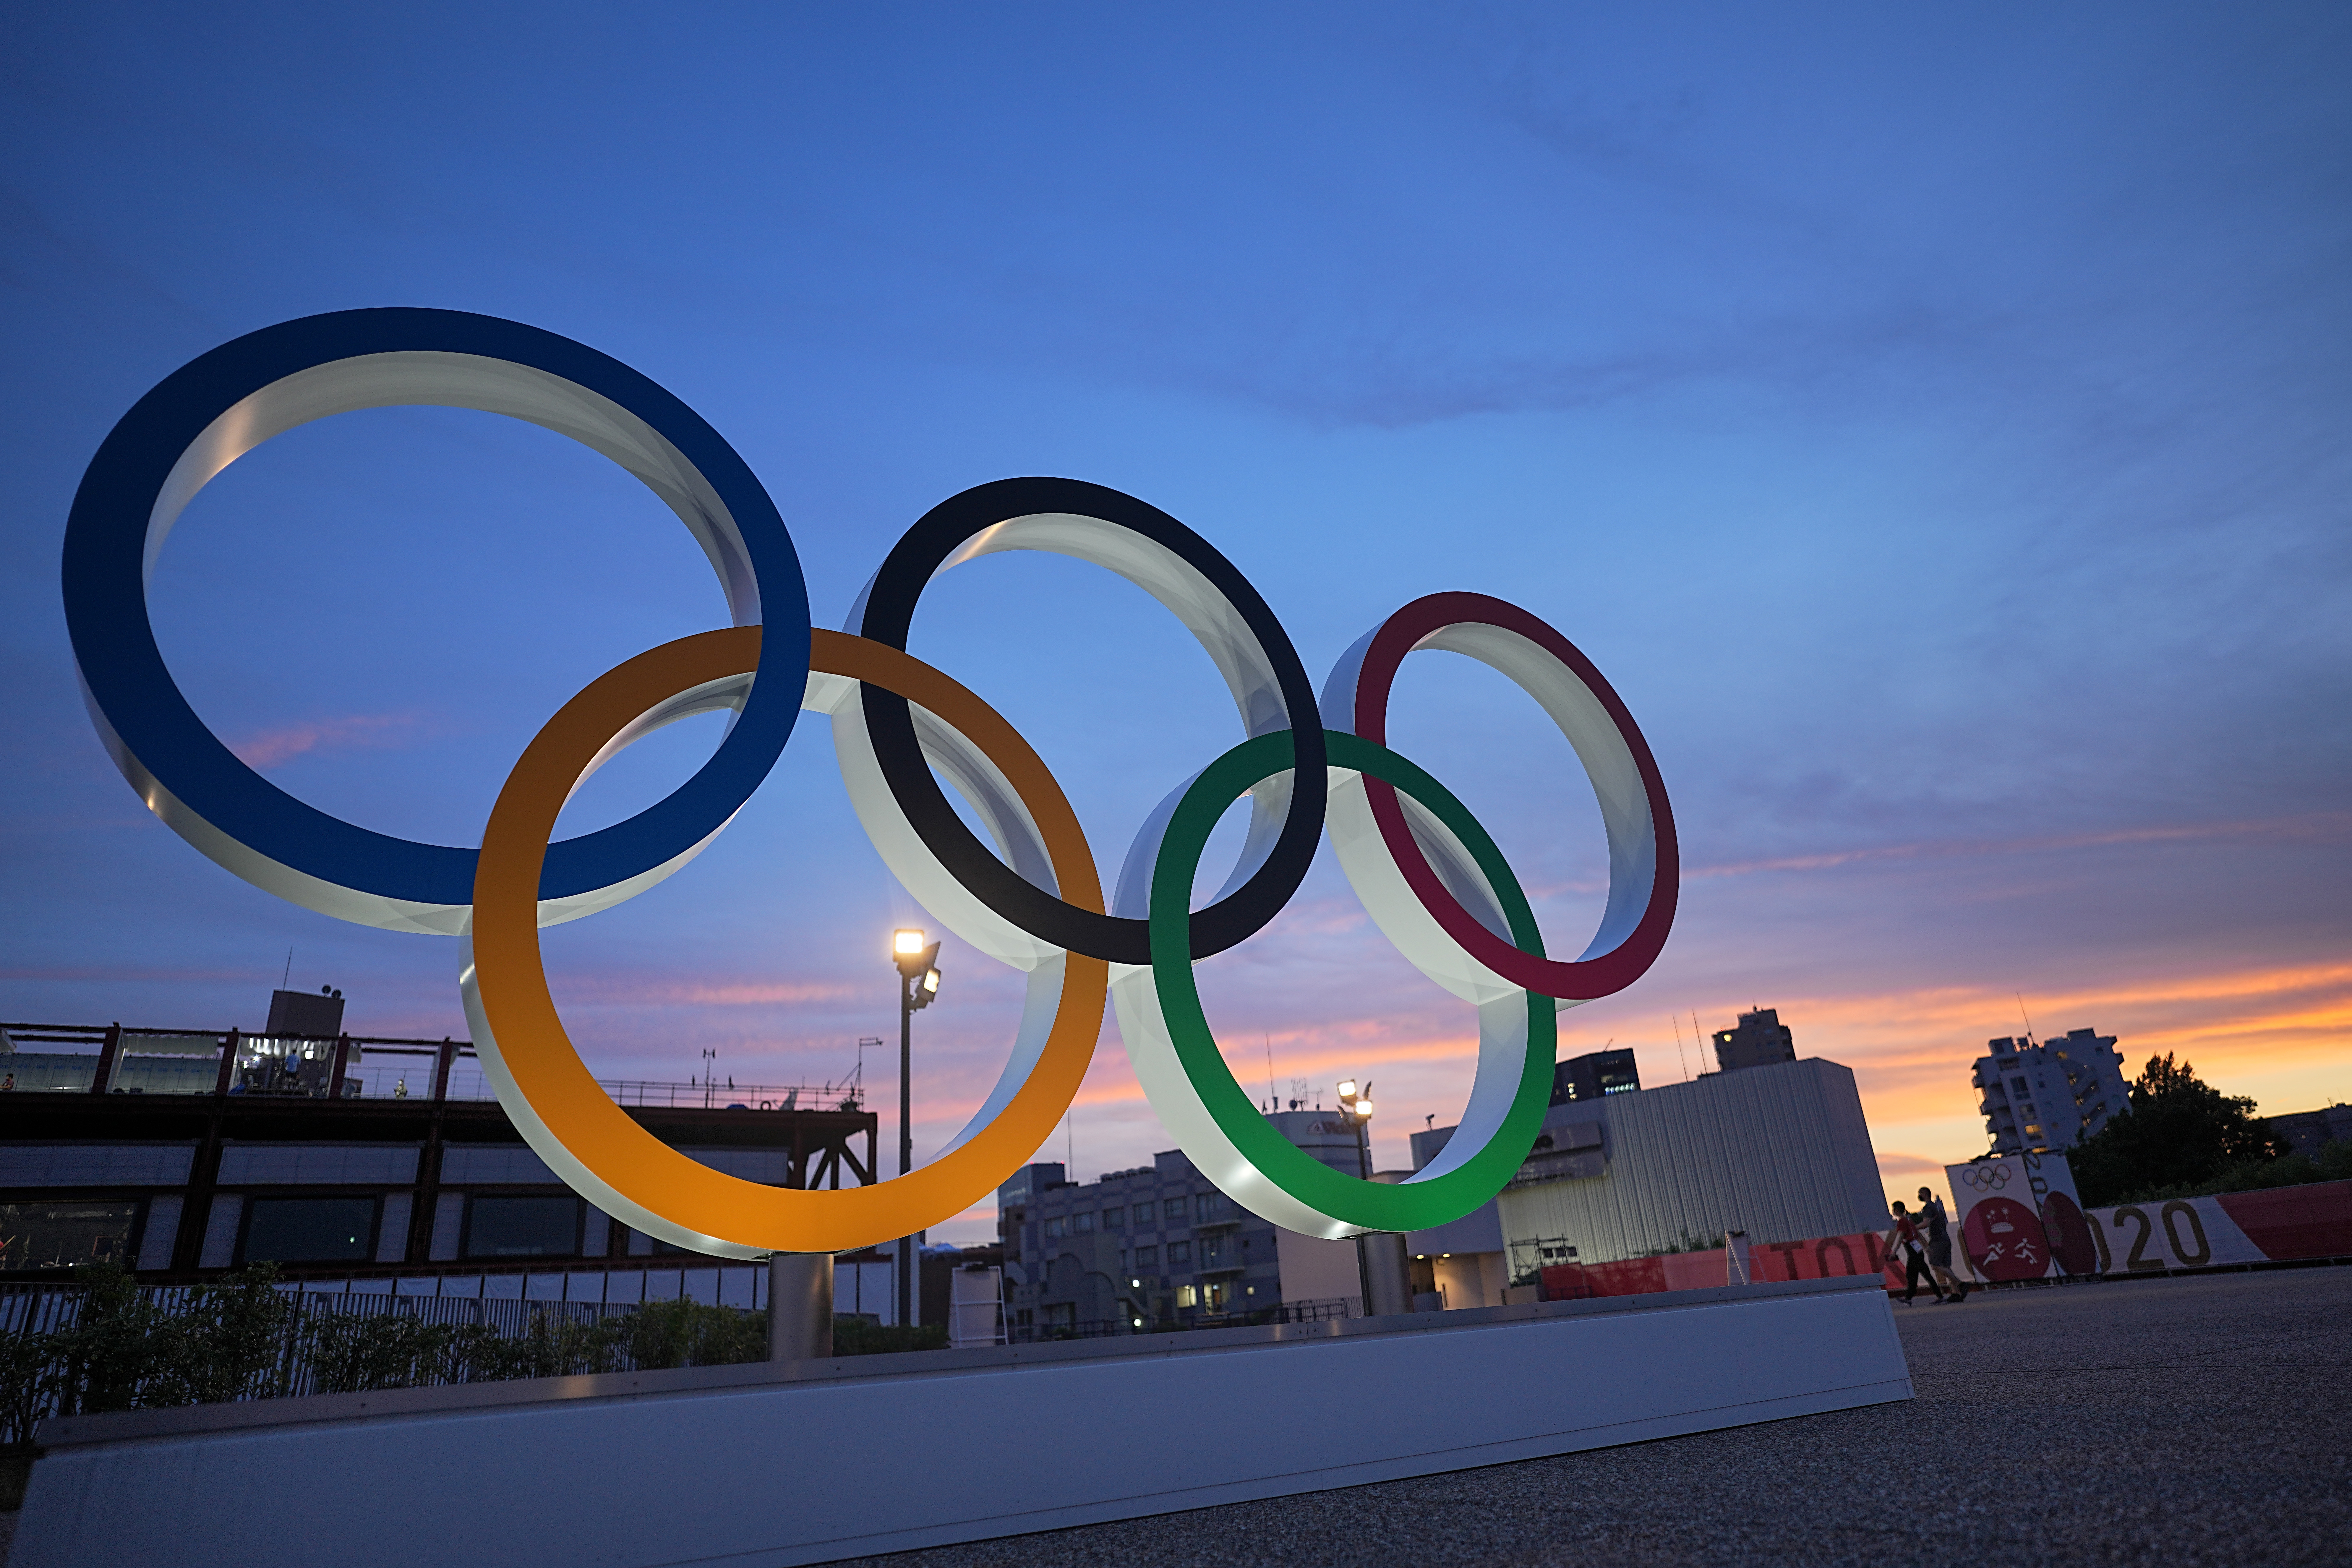 The Olympic rings in Tokyo.